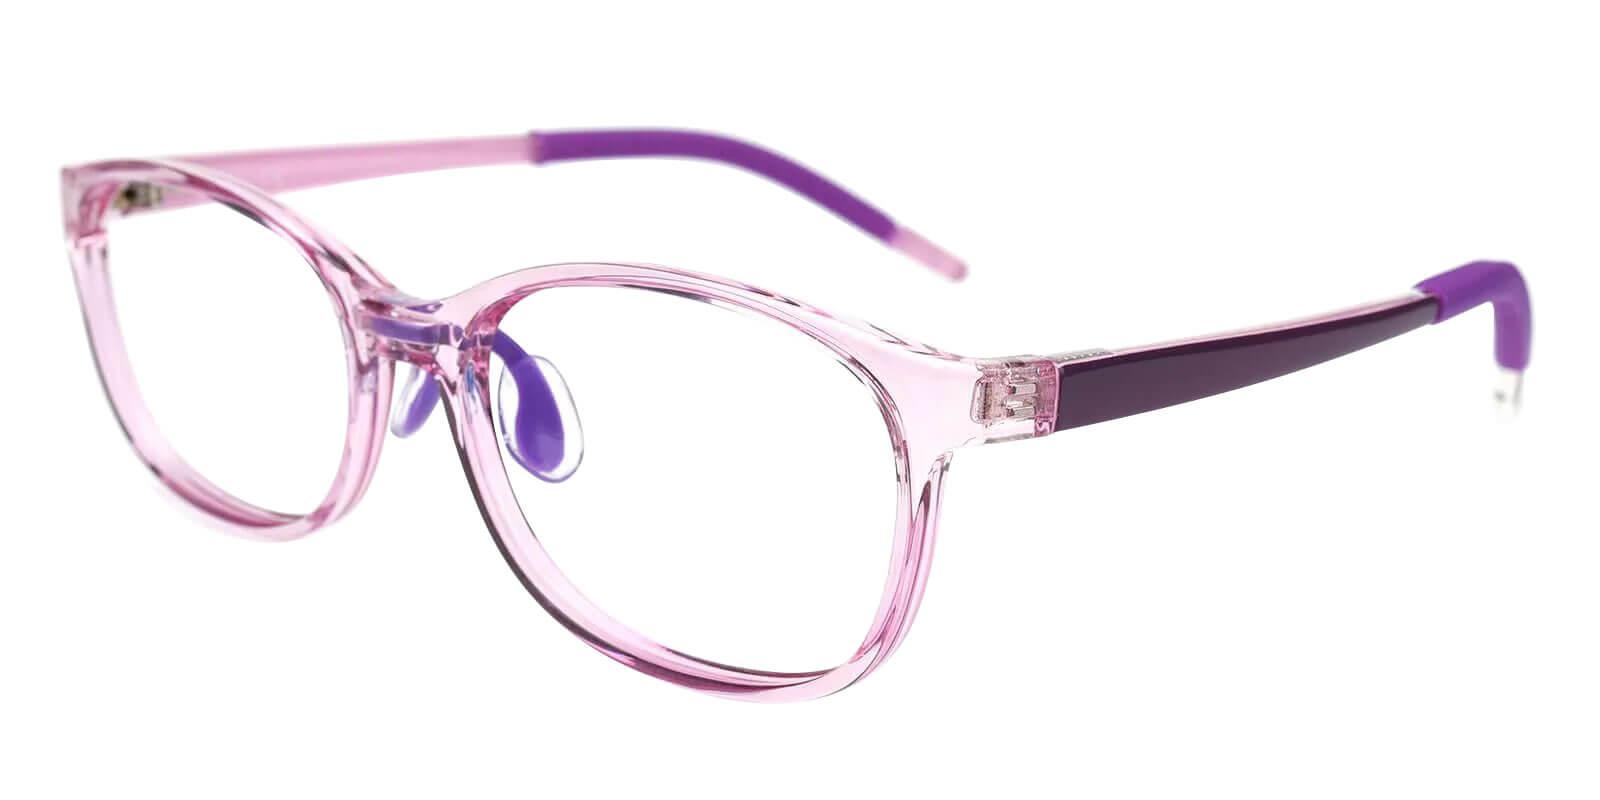 Kids-Willy Purple TR Eyeglasses , Lightweight , NosePads Frames from ABBE Glasses